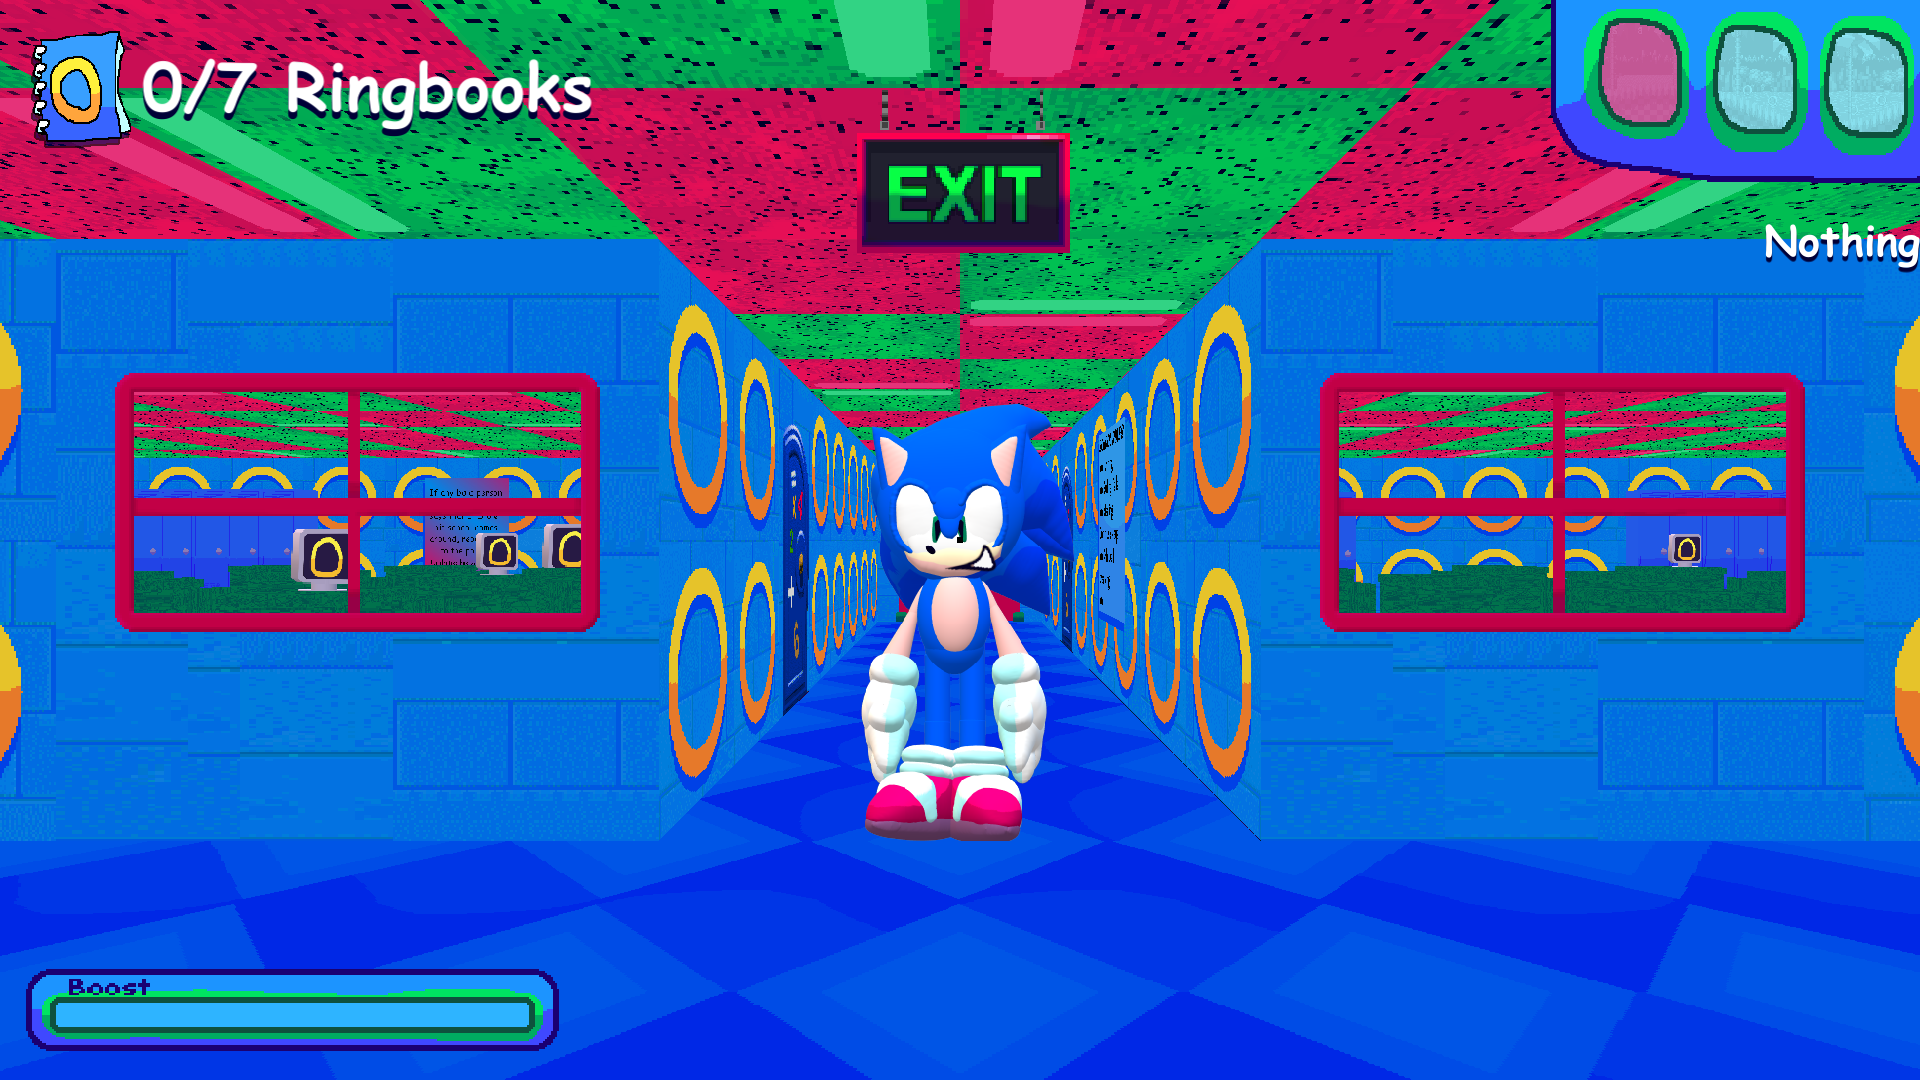 GitHub - icepick4/Sonic-Game: 🦔 A simple Sonic game inspired by